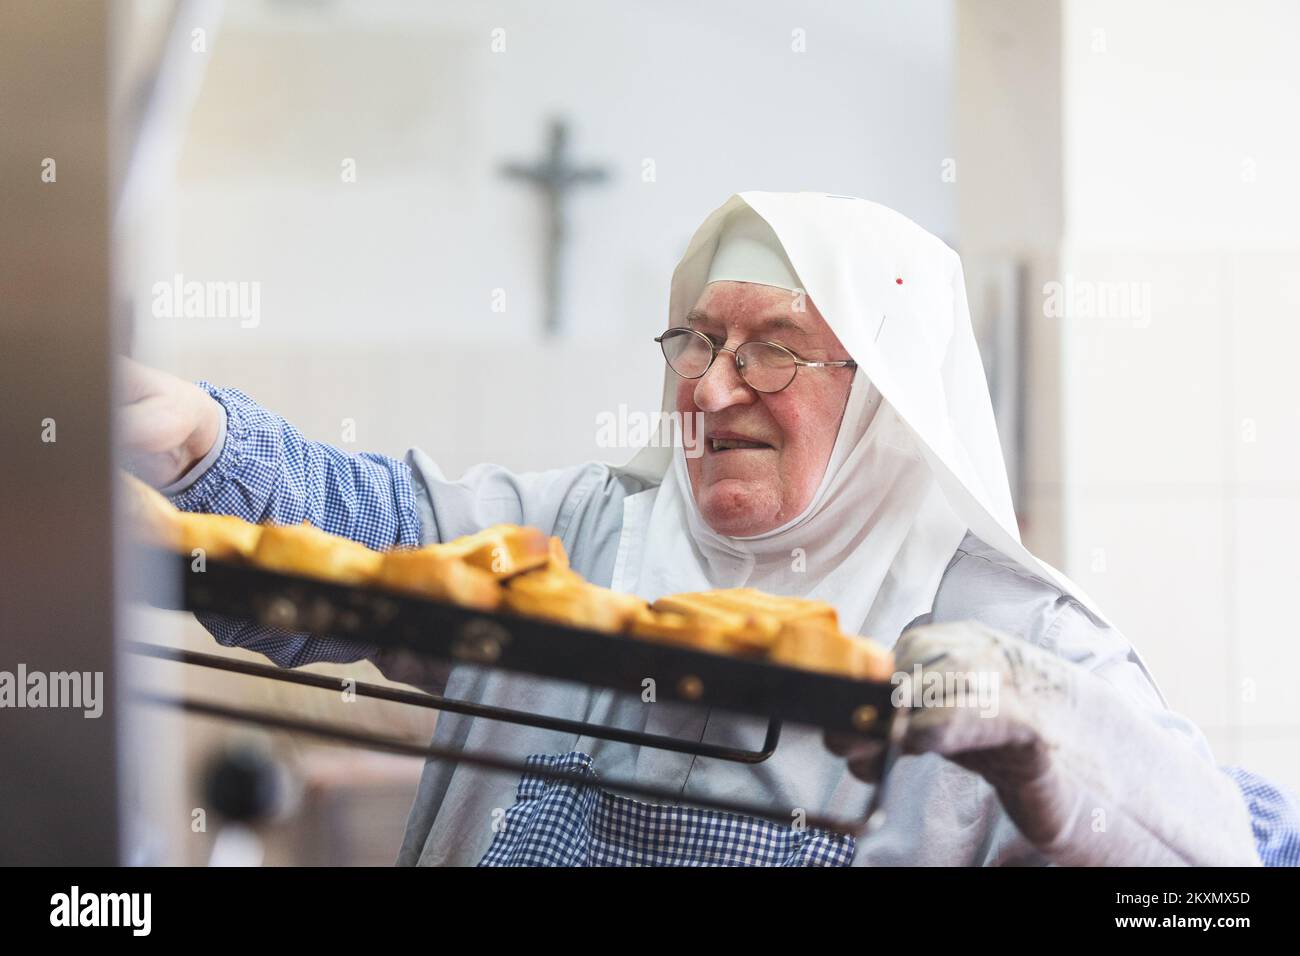 Nuns of Saint Margaretha monastery in Pag, Croatia baking bagels and nunsâ€™ pastry that aims to preserve and develop specific historically rooted creative culinary skills originating from the Benedictine community on 18. MArch 2021. Photo: Marko Dimic/PIXSELL Stock Photo